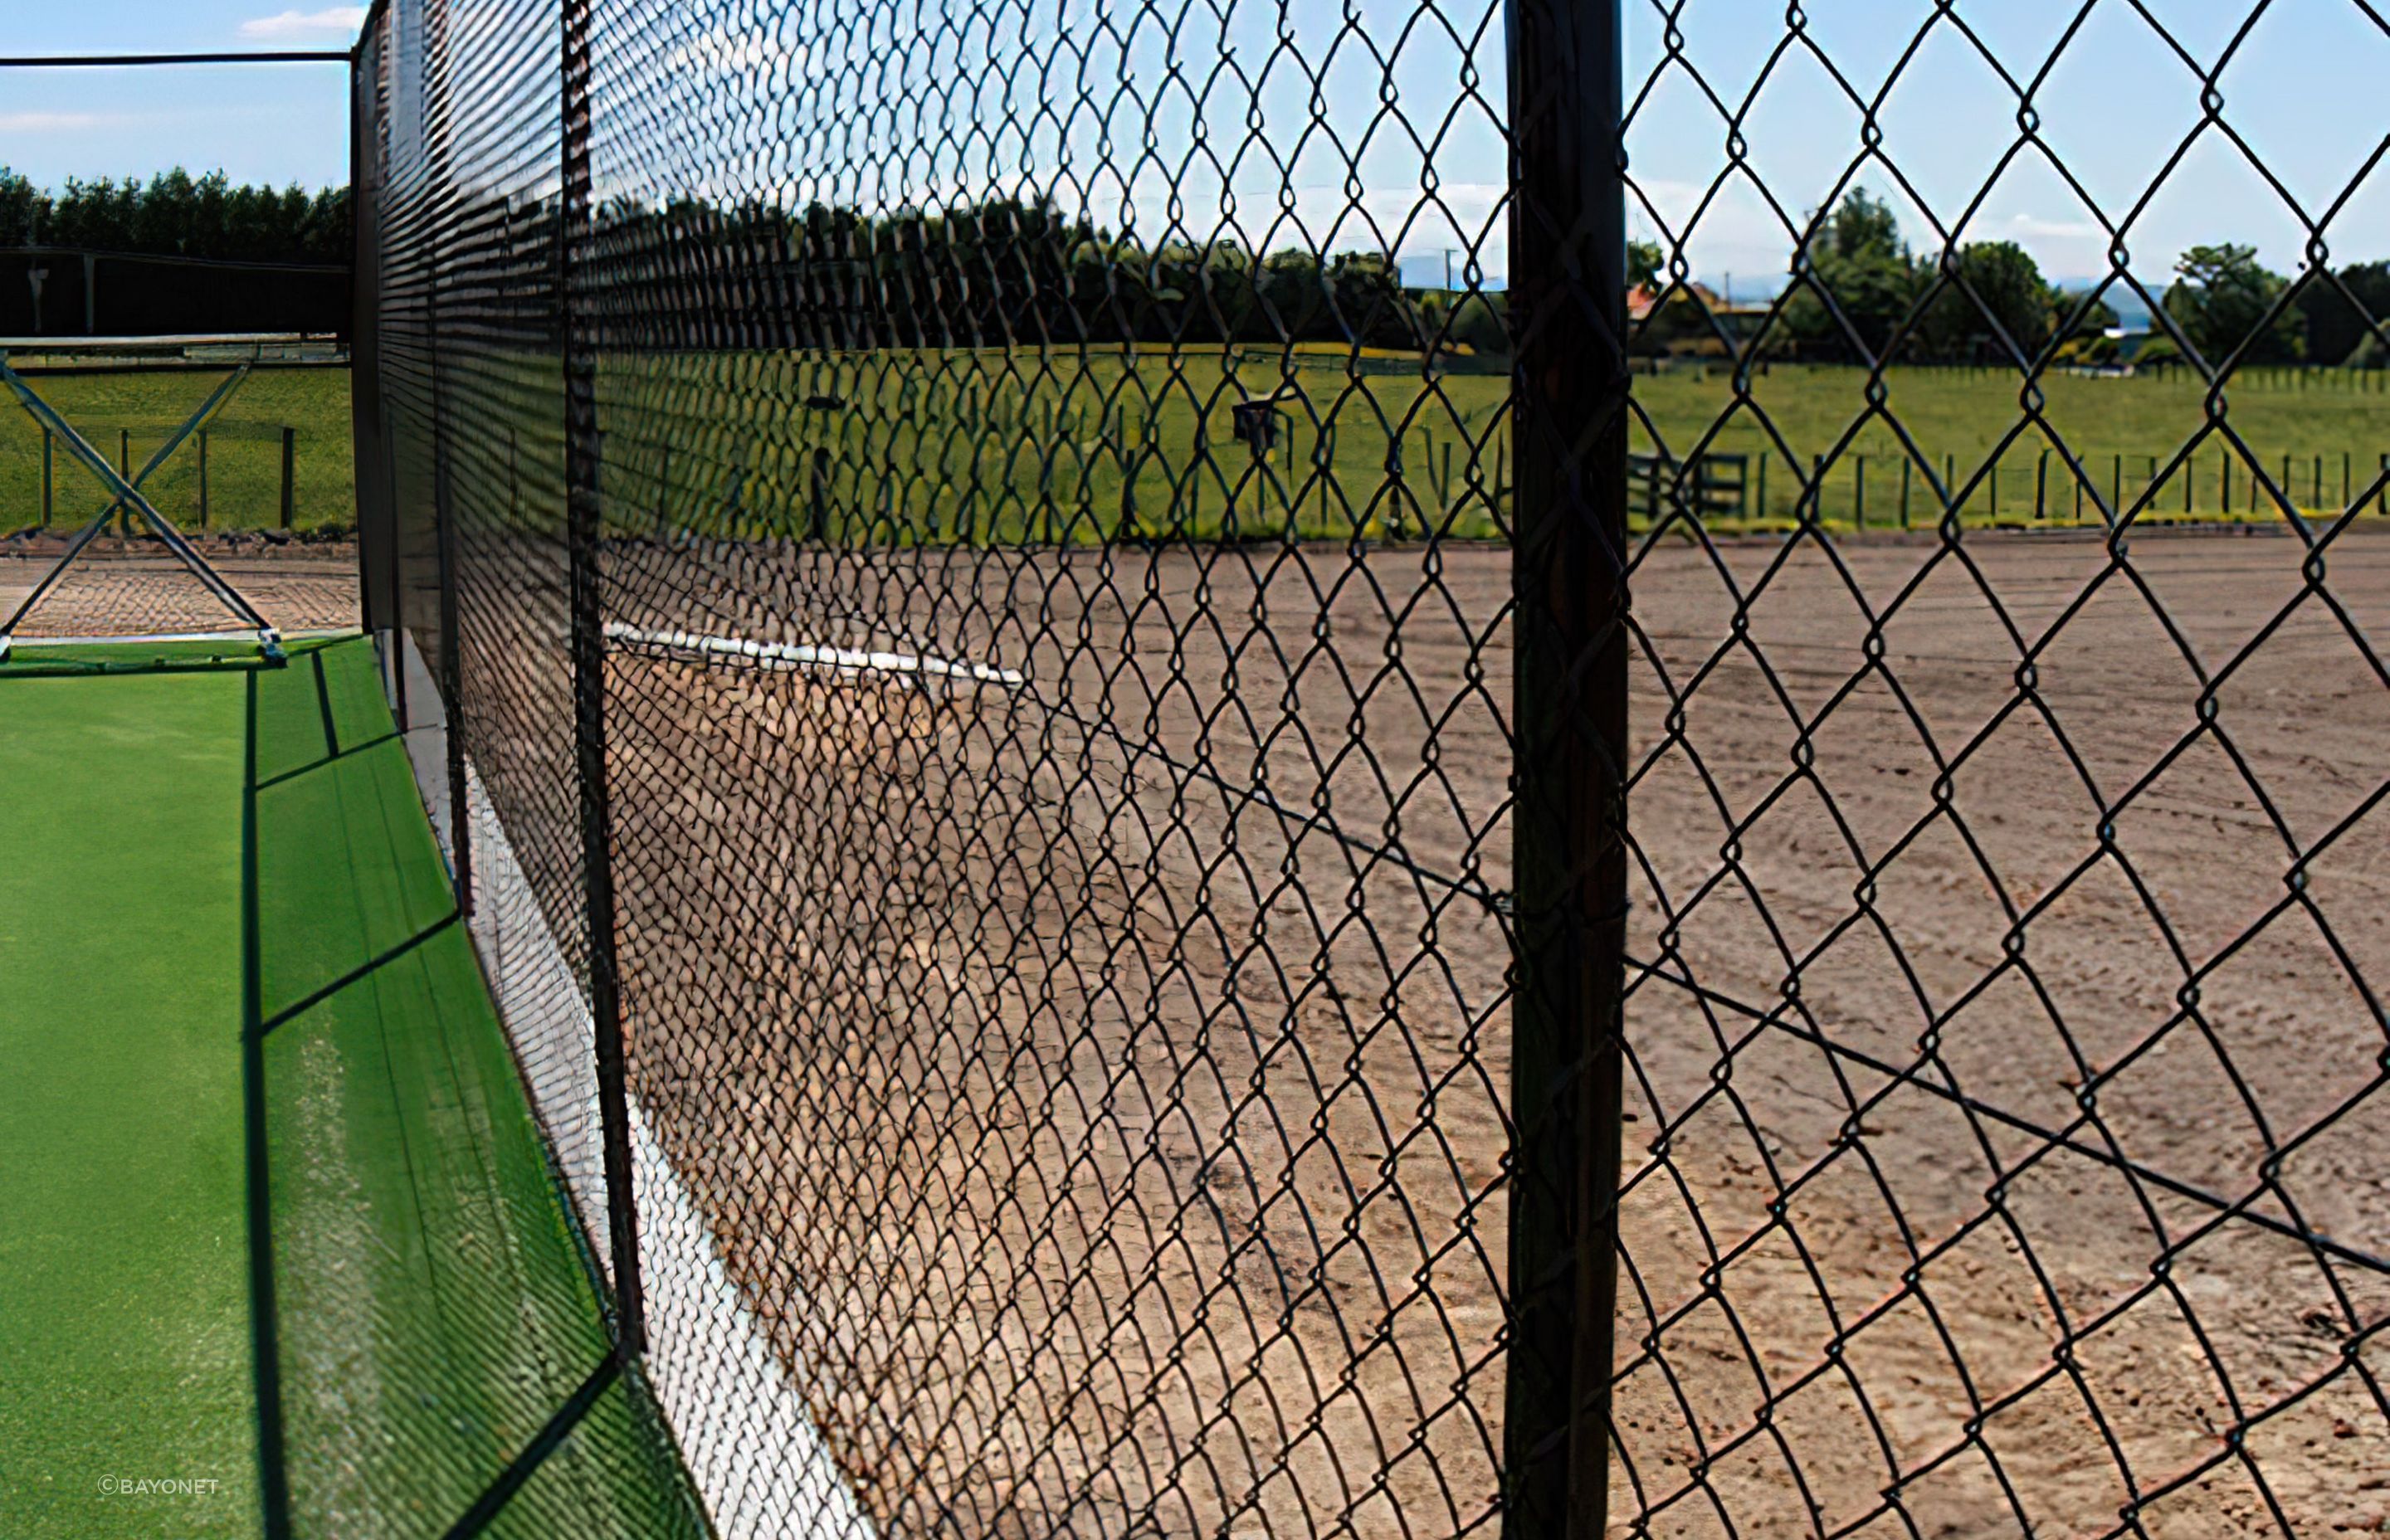 Functional but highly effective, there are plenty of applications for chain link fencing, seen here featuring Bayonet Chain Link Netting.